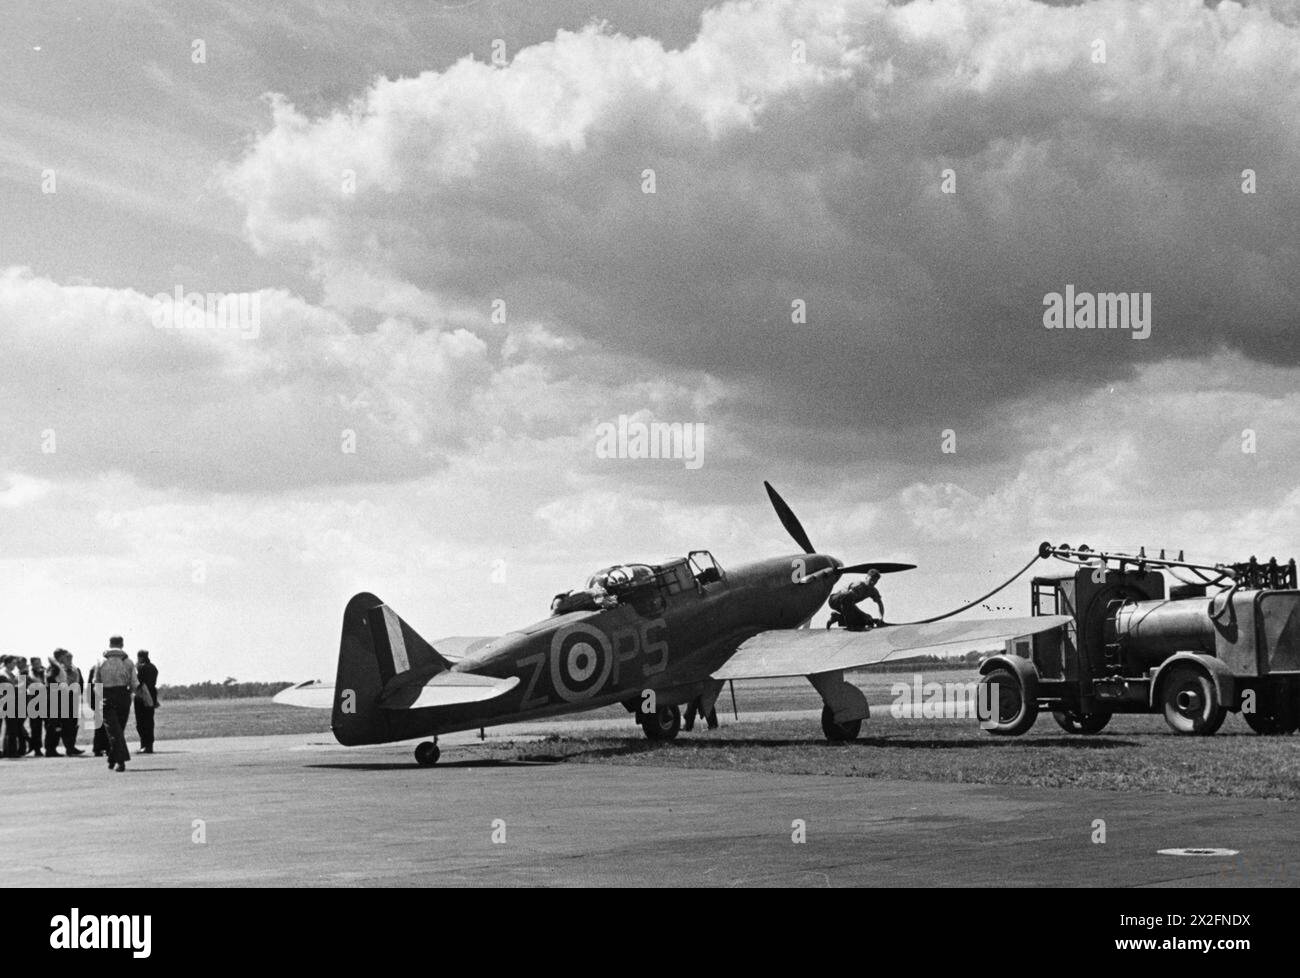 THE BATTLE OF BRITAIN 1940 - Boulton Paul Defiant of No. 264 Squadron being refuelled by an Albion AM463 3-Point Refueller, Kirton in Lindsey, July 1940 Stock Photo